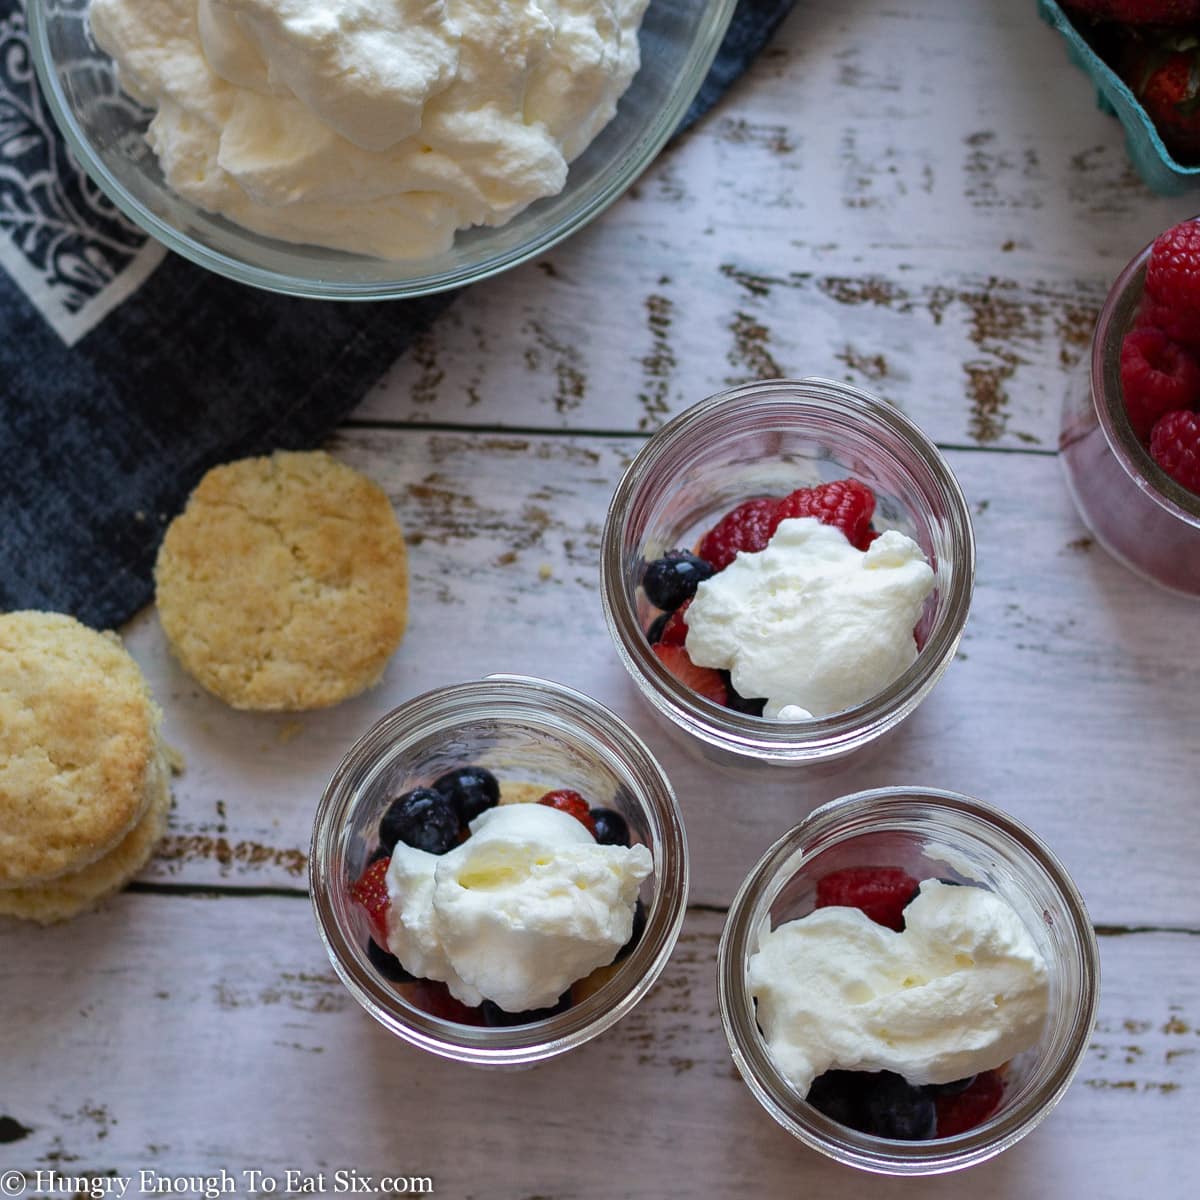 Three jars with layers of cream and berries on a white wooden surface.